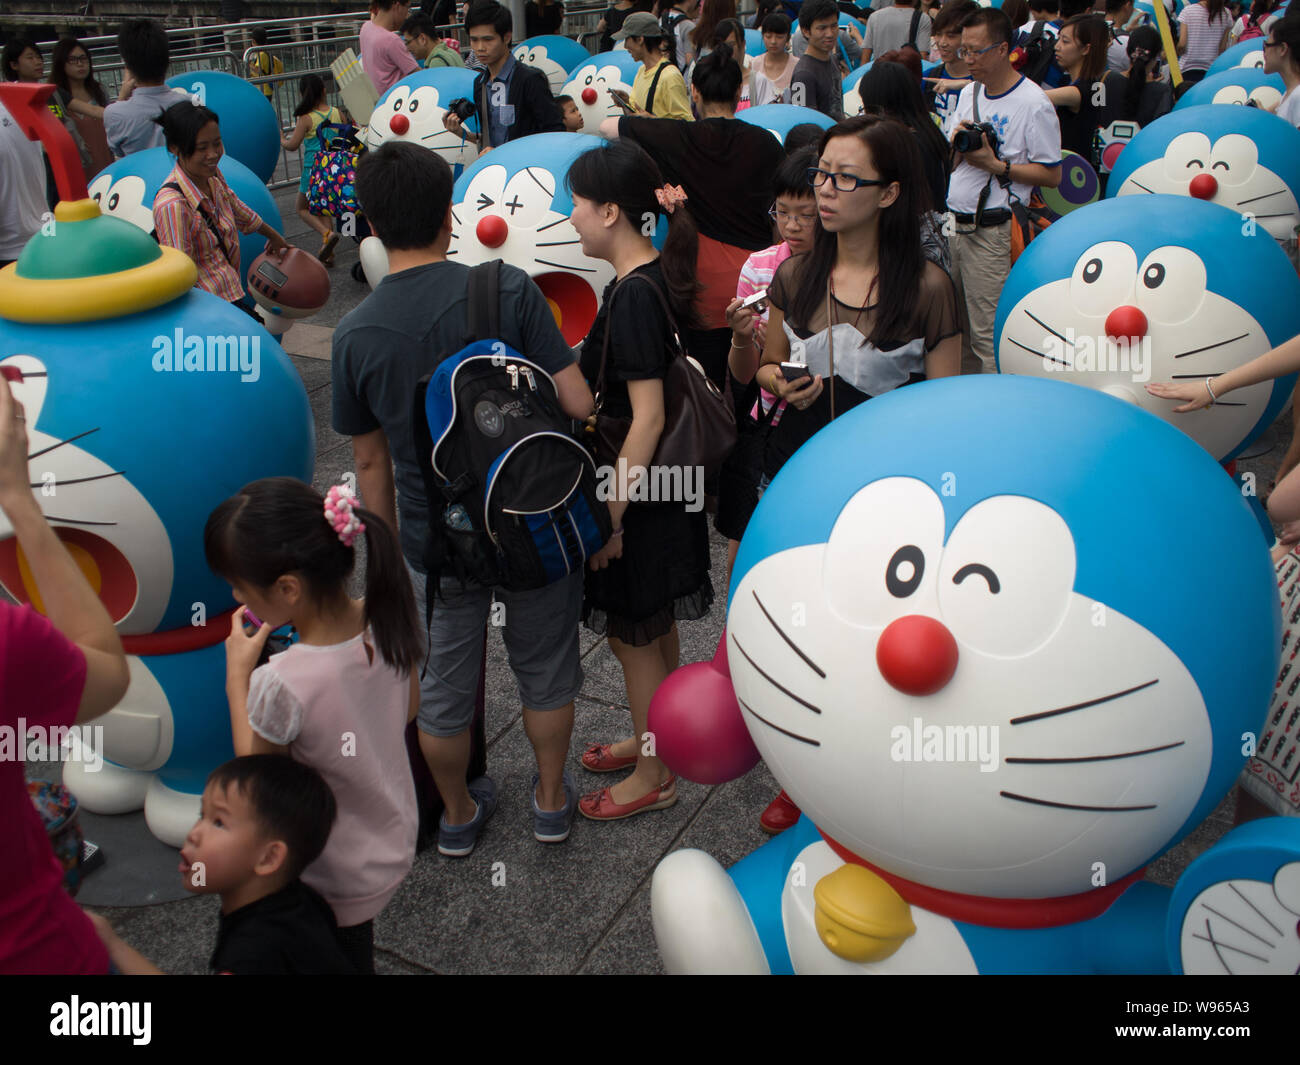 Citizens view models of Doraemon, a famous Japanese cartoon character, at  an exhibition in Hong Kong, China, 26 August 2012 Stock Photo - Alamy